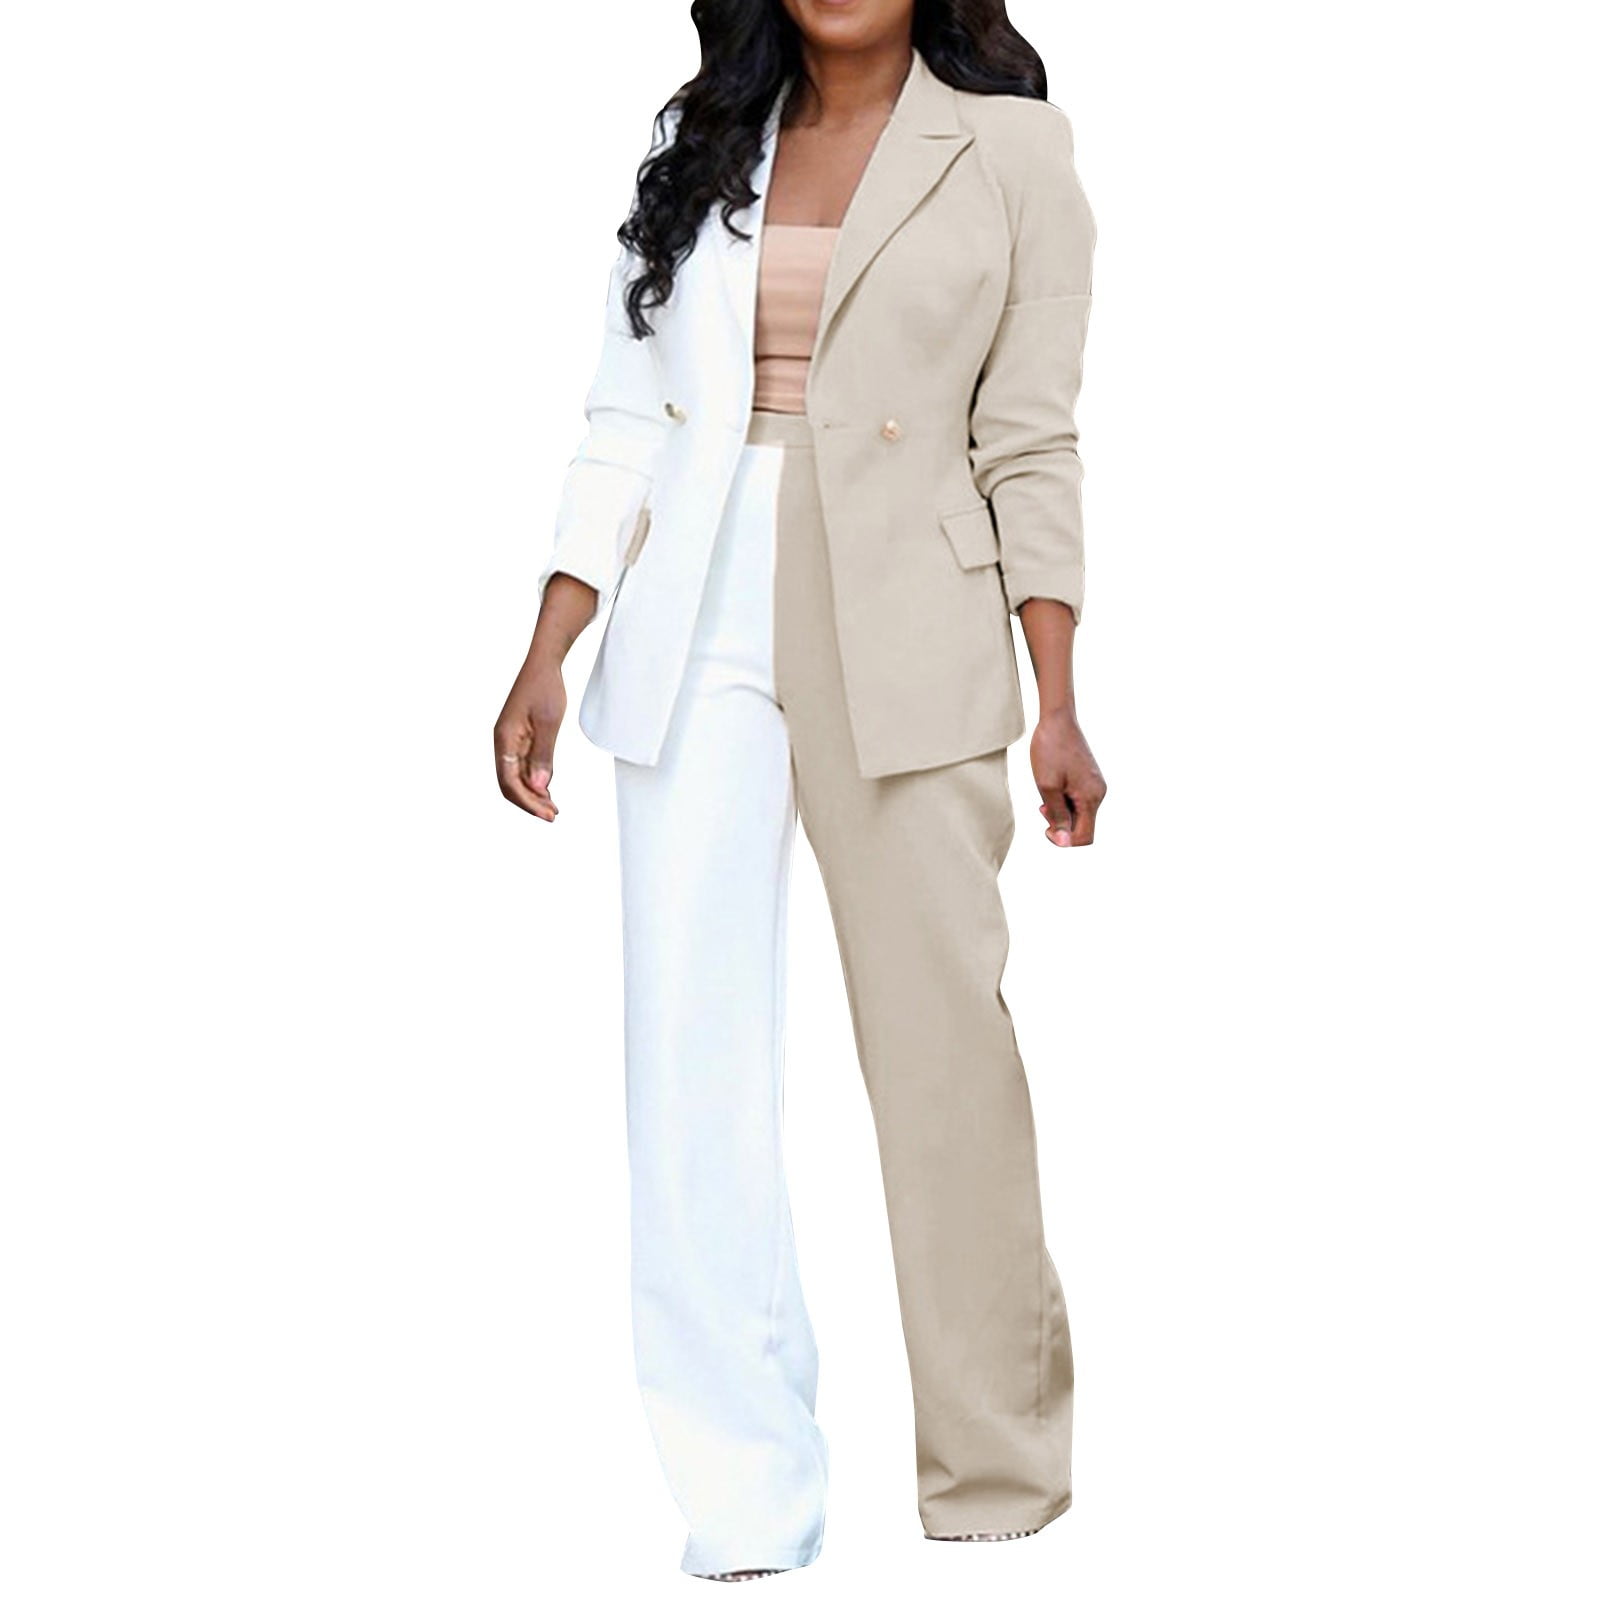 Details more than 206 formal wear pant suits best